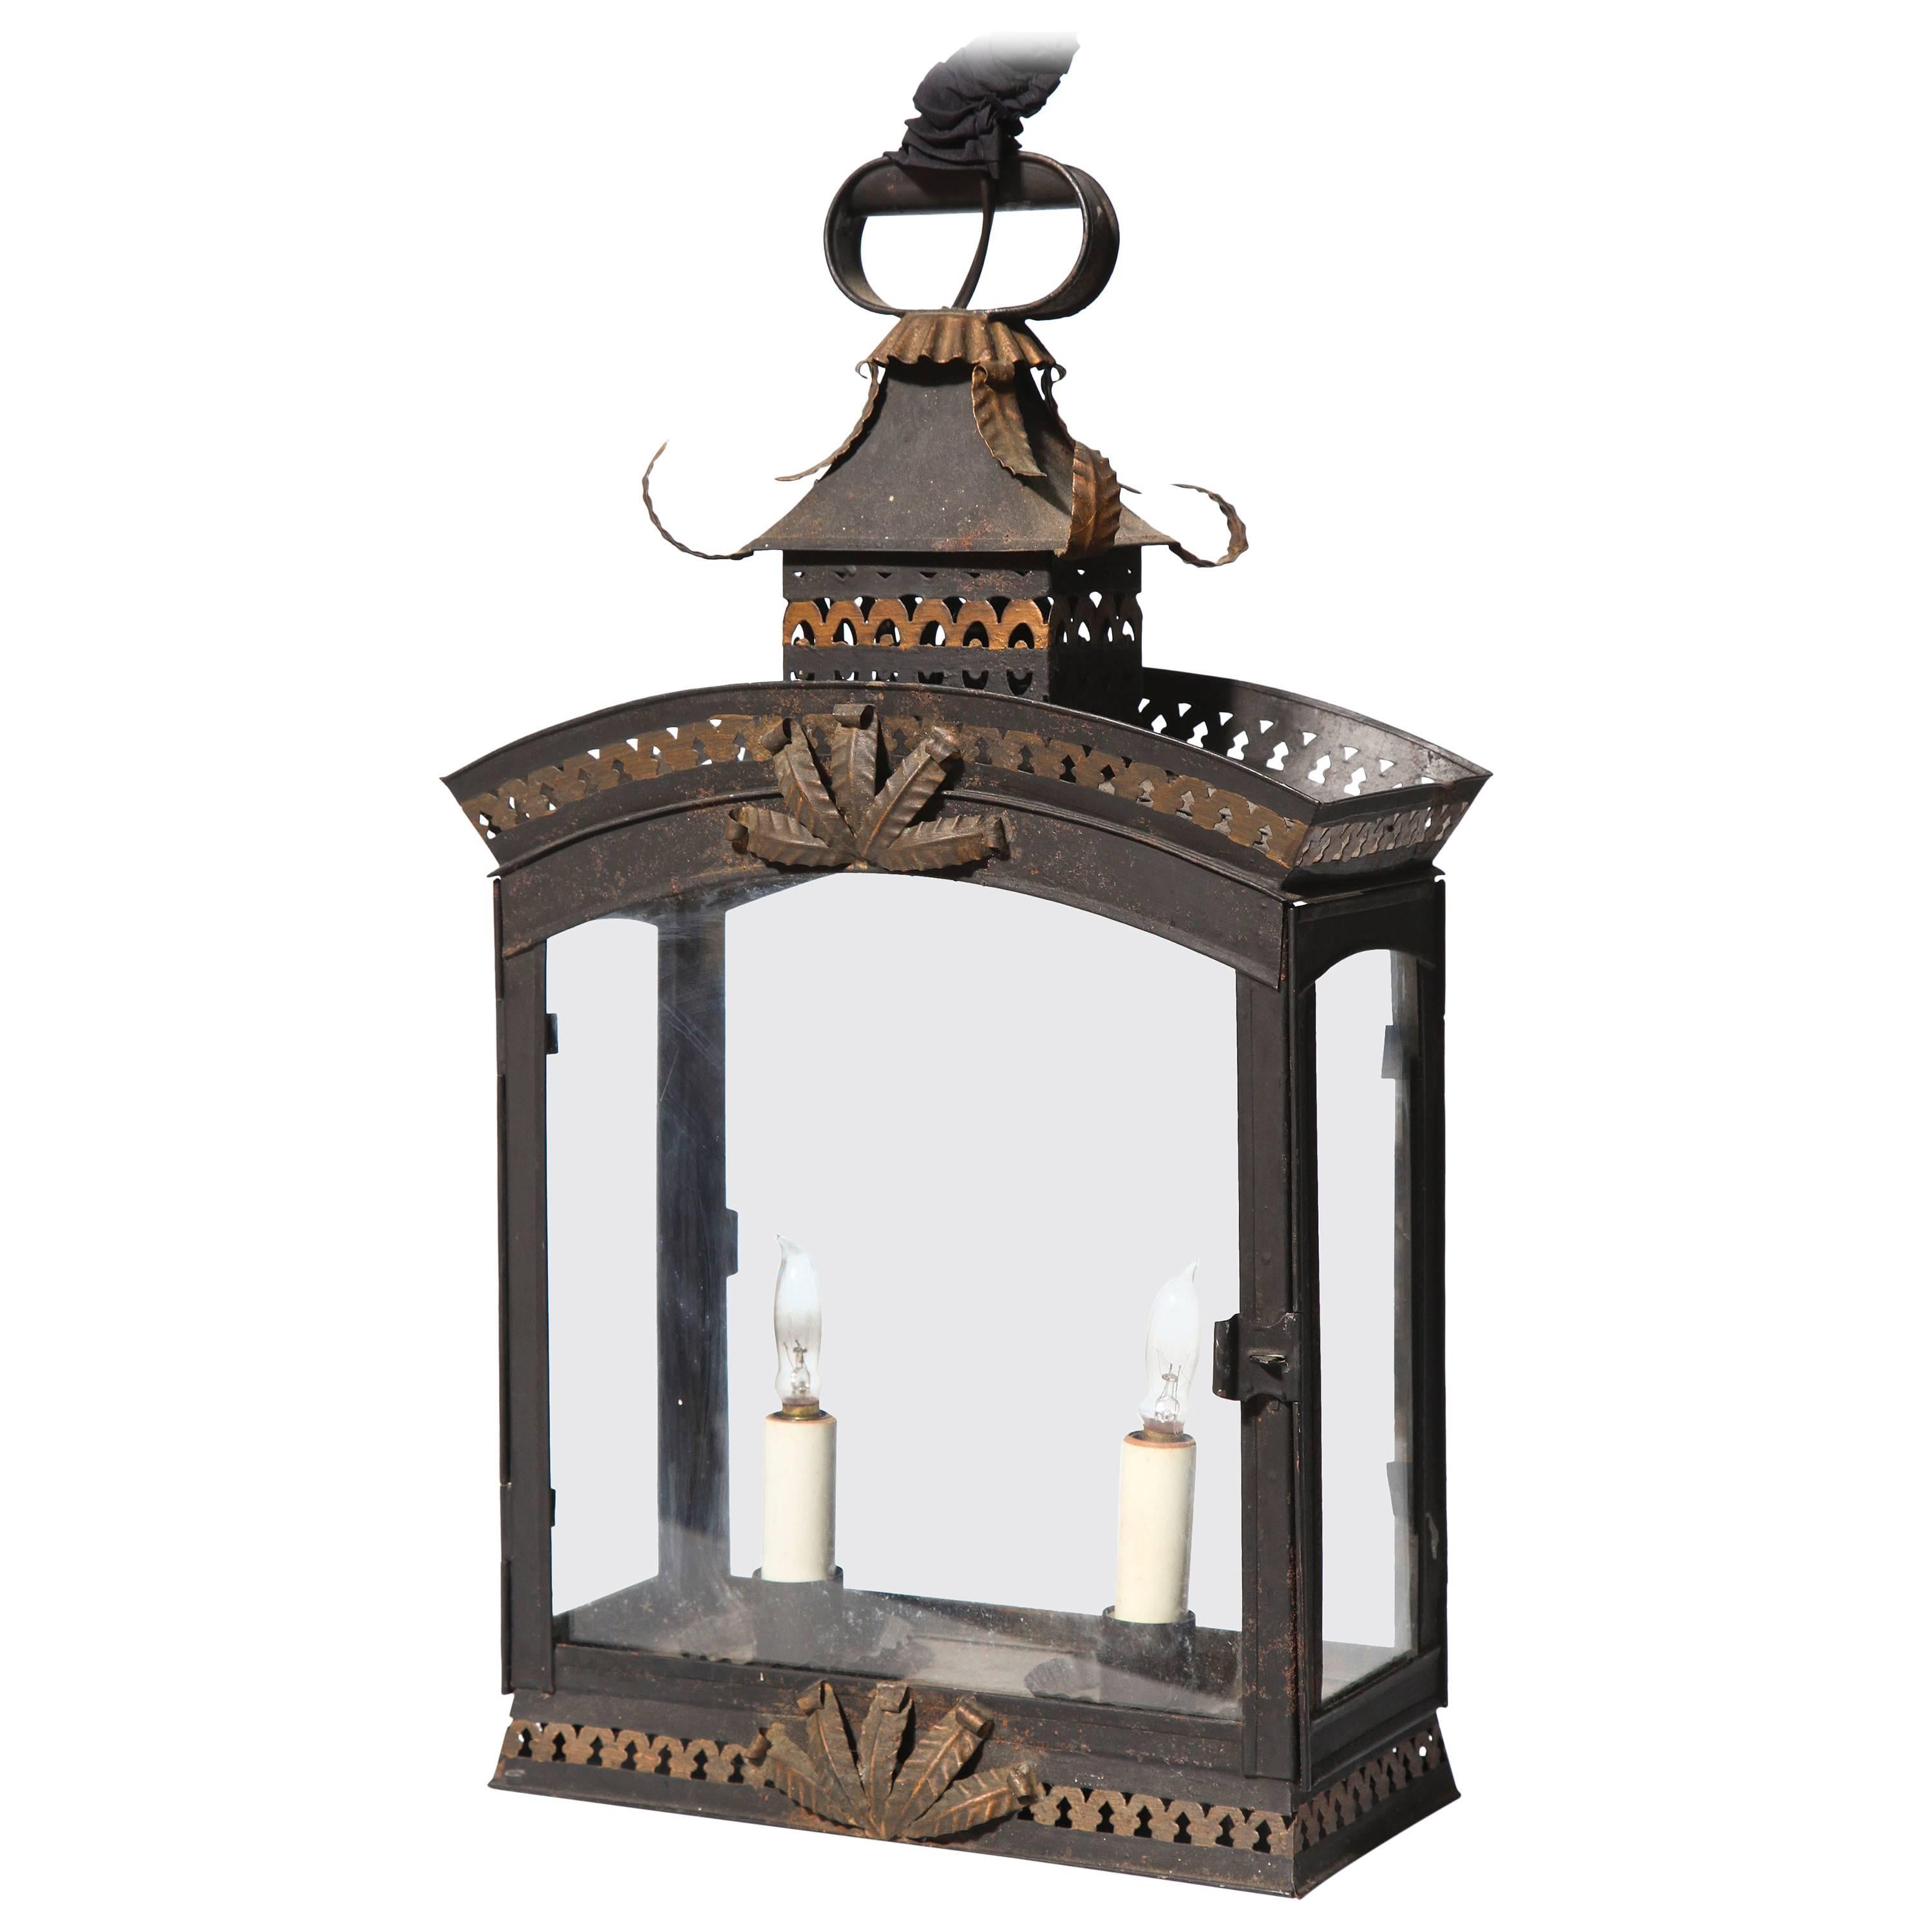 Charming Two-Light Tole Painted and Gilded Lantern